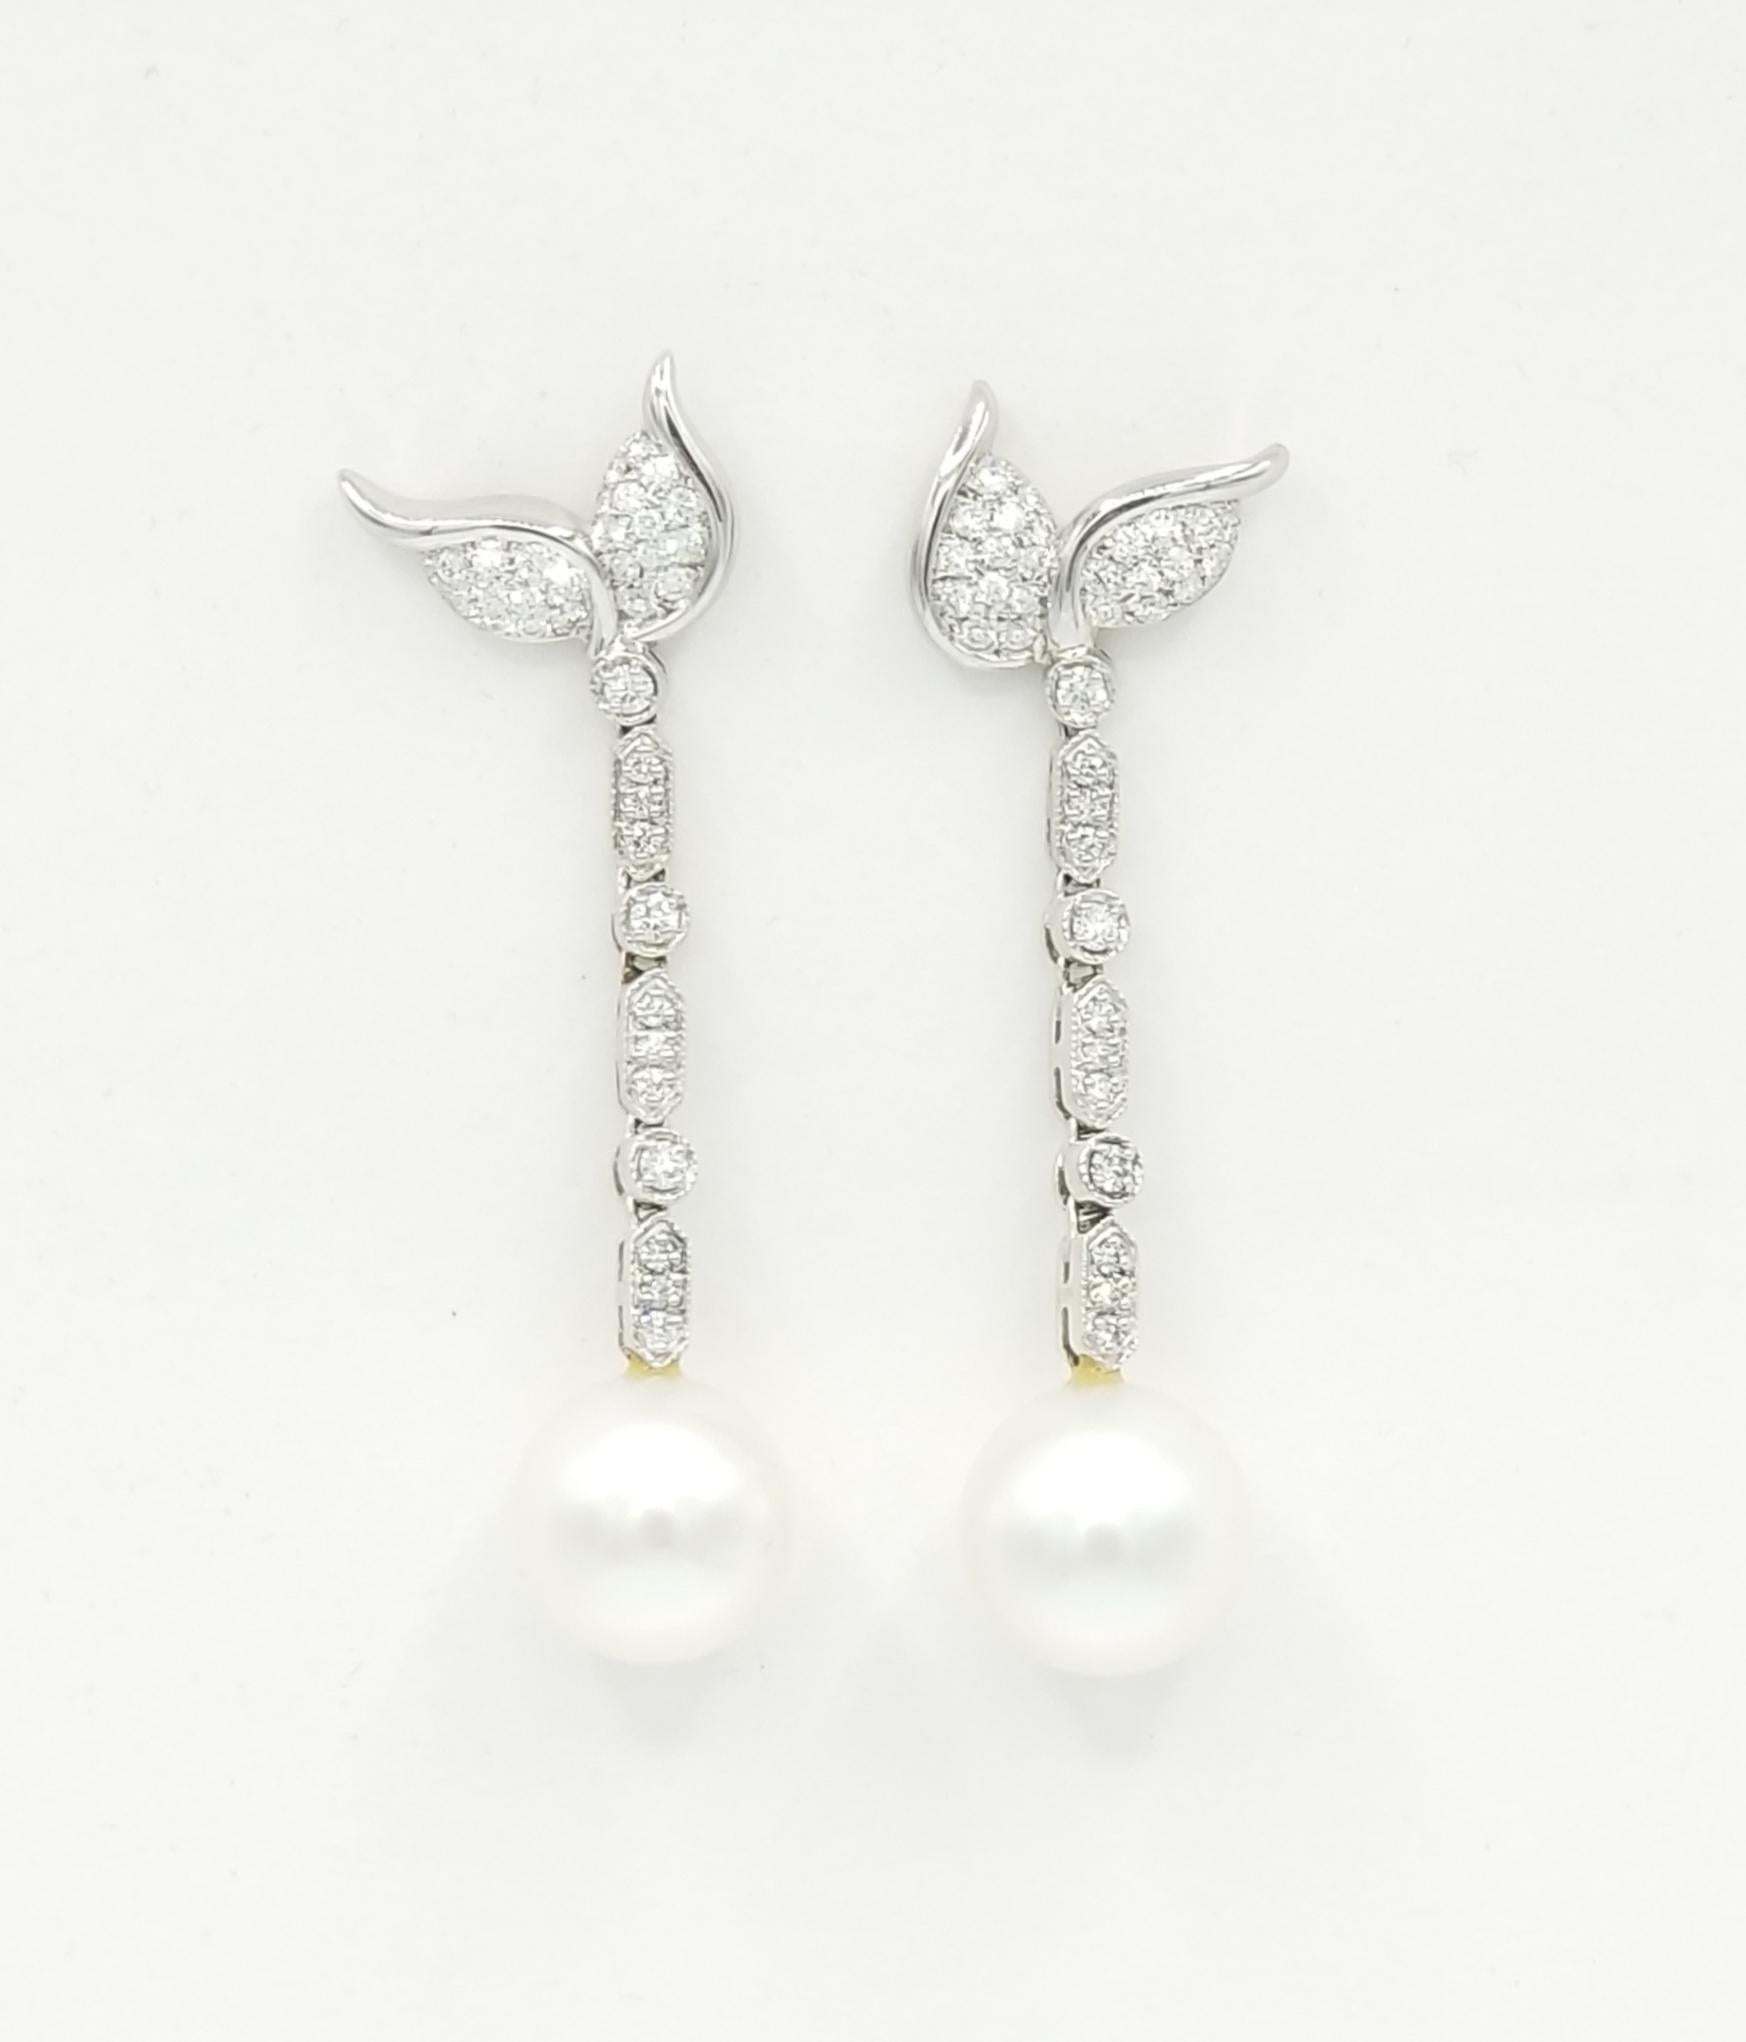 Elevate your jewelry collection with these exquisite 18k white gold oval earrings from LaFrancee. The dangle/drop style features stunning South Sea pearls and diamonds, making them a perfect addition to any formal outfit. The pearls are AAAA top